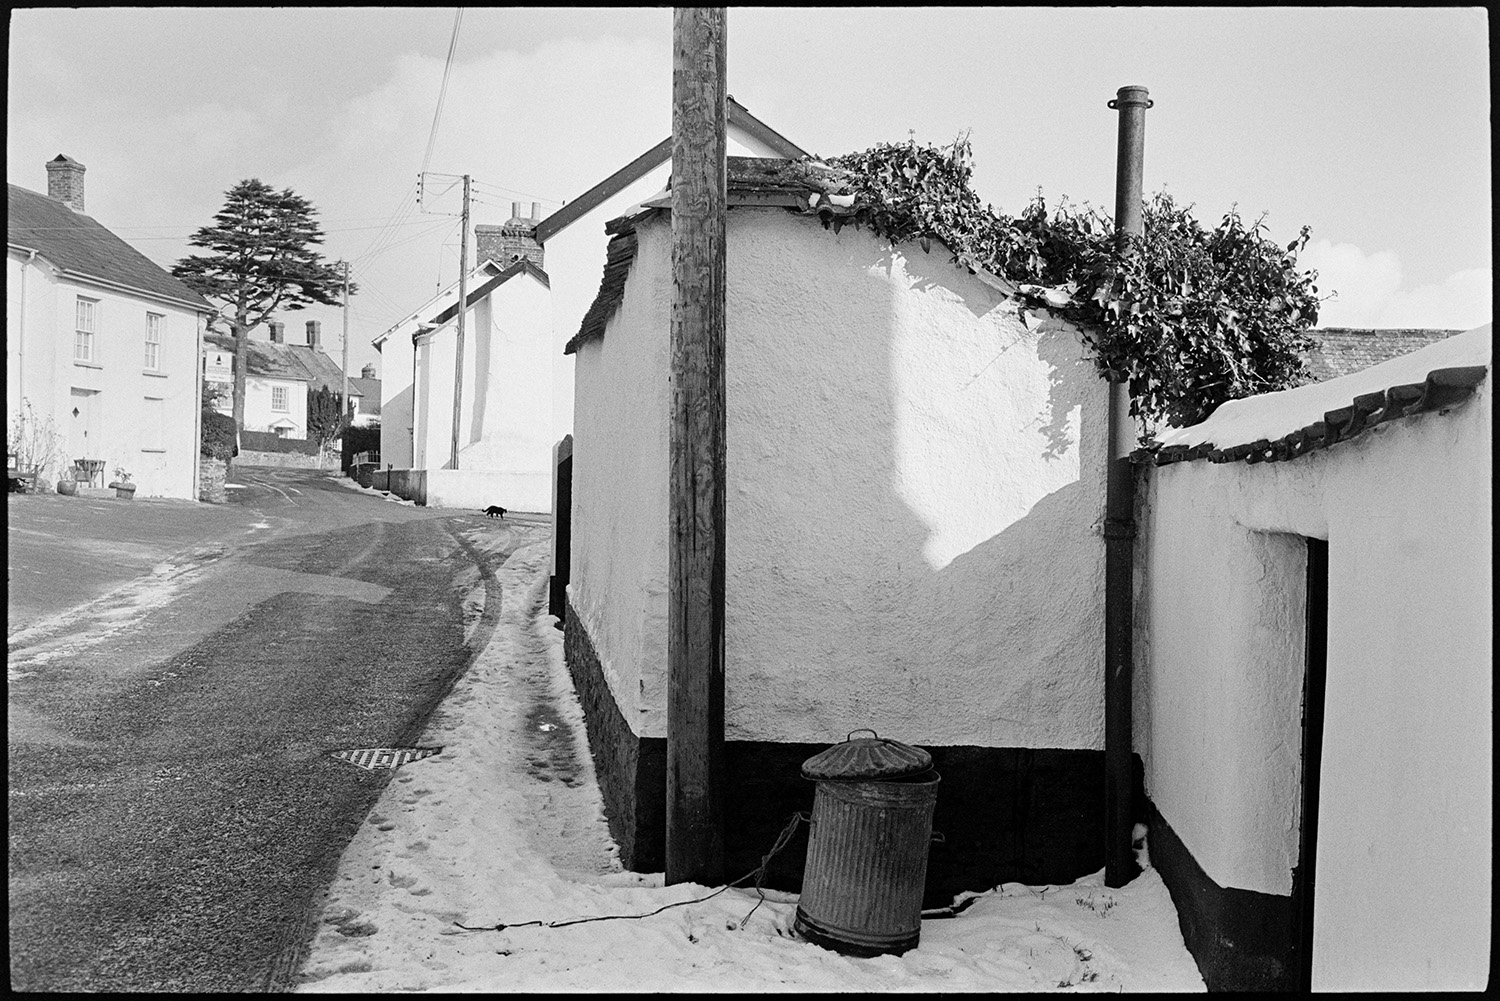 Street scene, cob walls, snow. 
[A cob wall fronting onto a street in Dolton. Snow has gathered on the edge of the street by a dustbin in the foreground. Houses and a cat can be seen further along the street.]